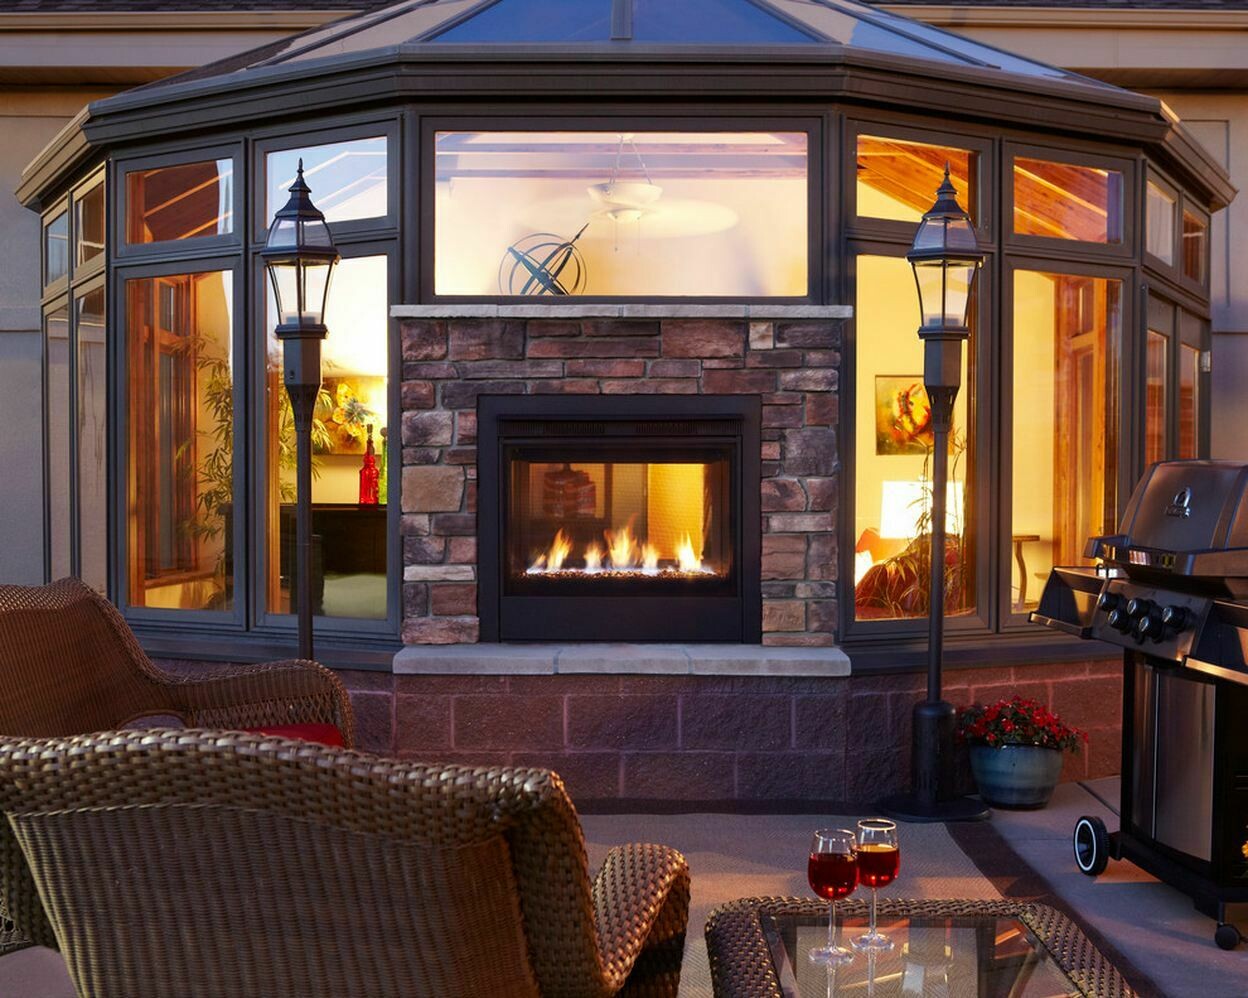 Heat & Glo indoor outdoor double sided gas fireplace in Pittsburgh PA